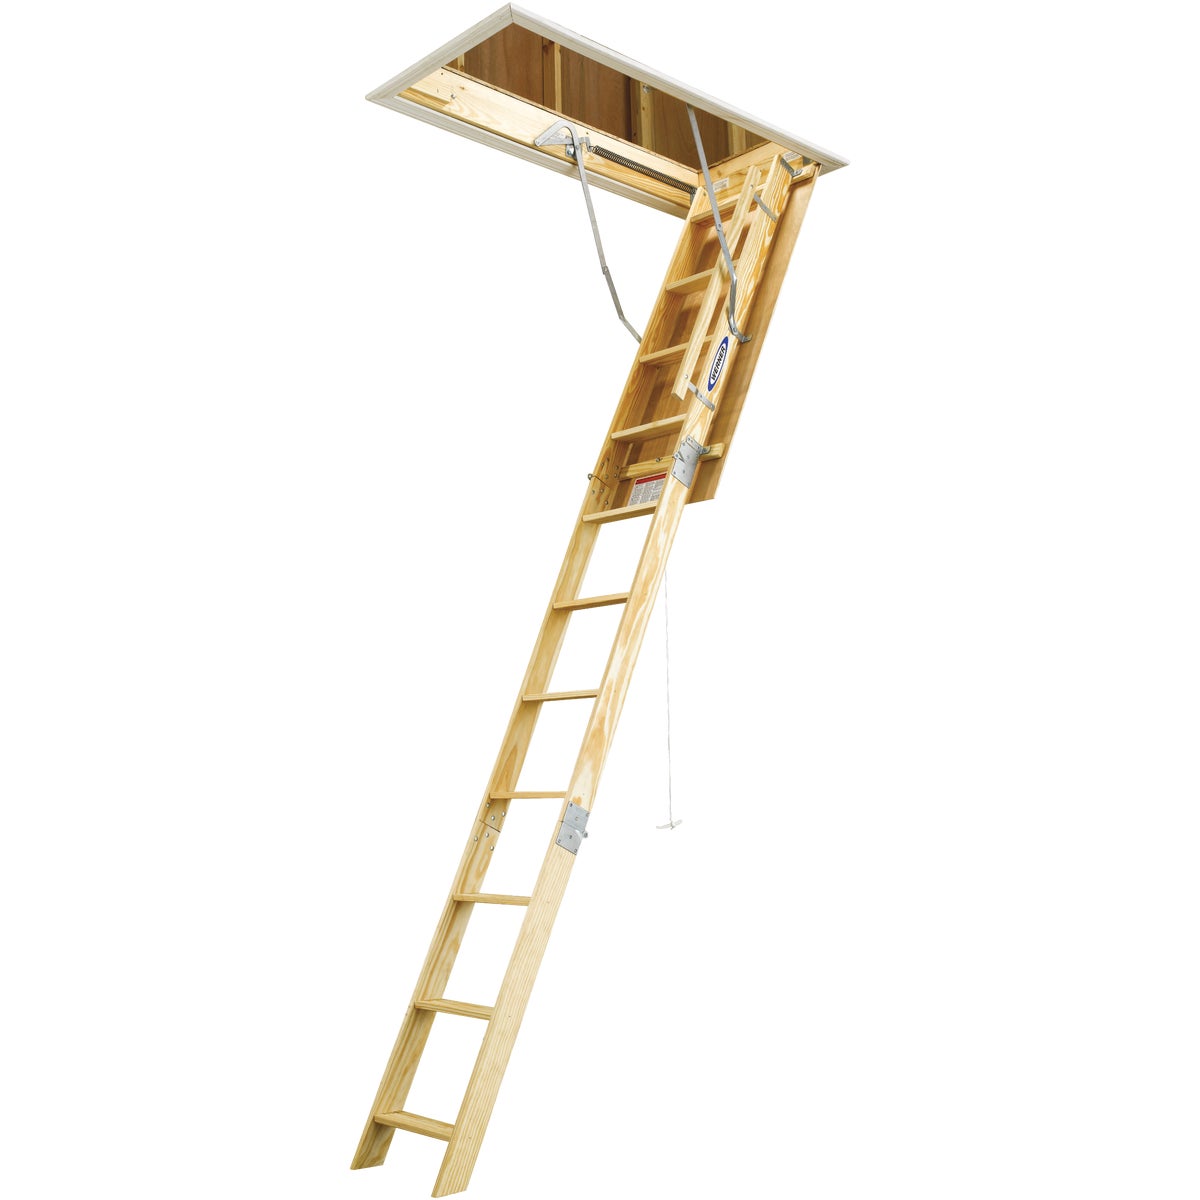 Werner W Series 7 Ft. 11 In. to 10 Ft. 4 In. 22-1/2 In. x 54 In. Wood Attic Ladder, 250 Lb. Load